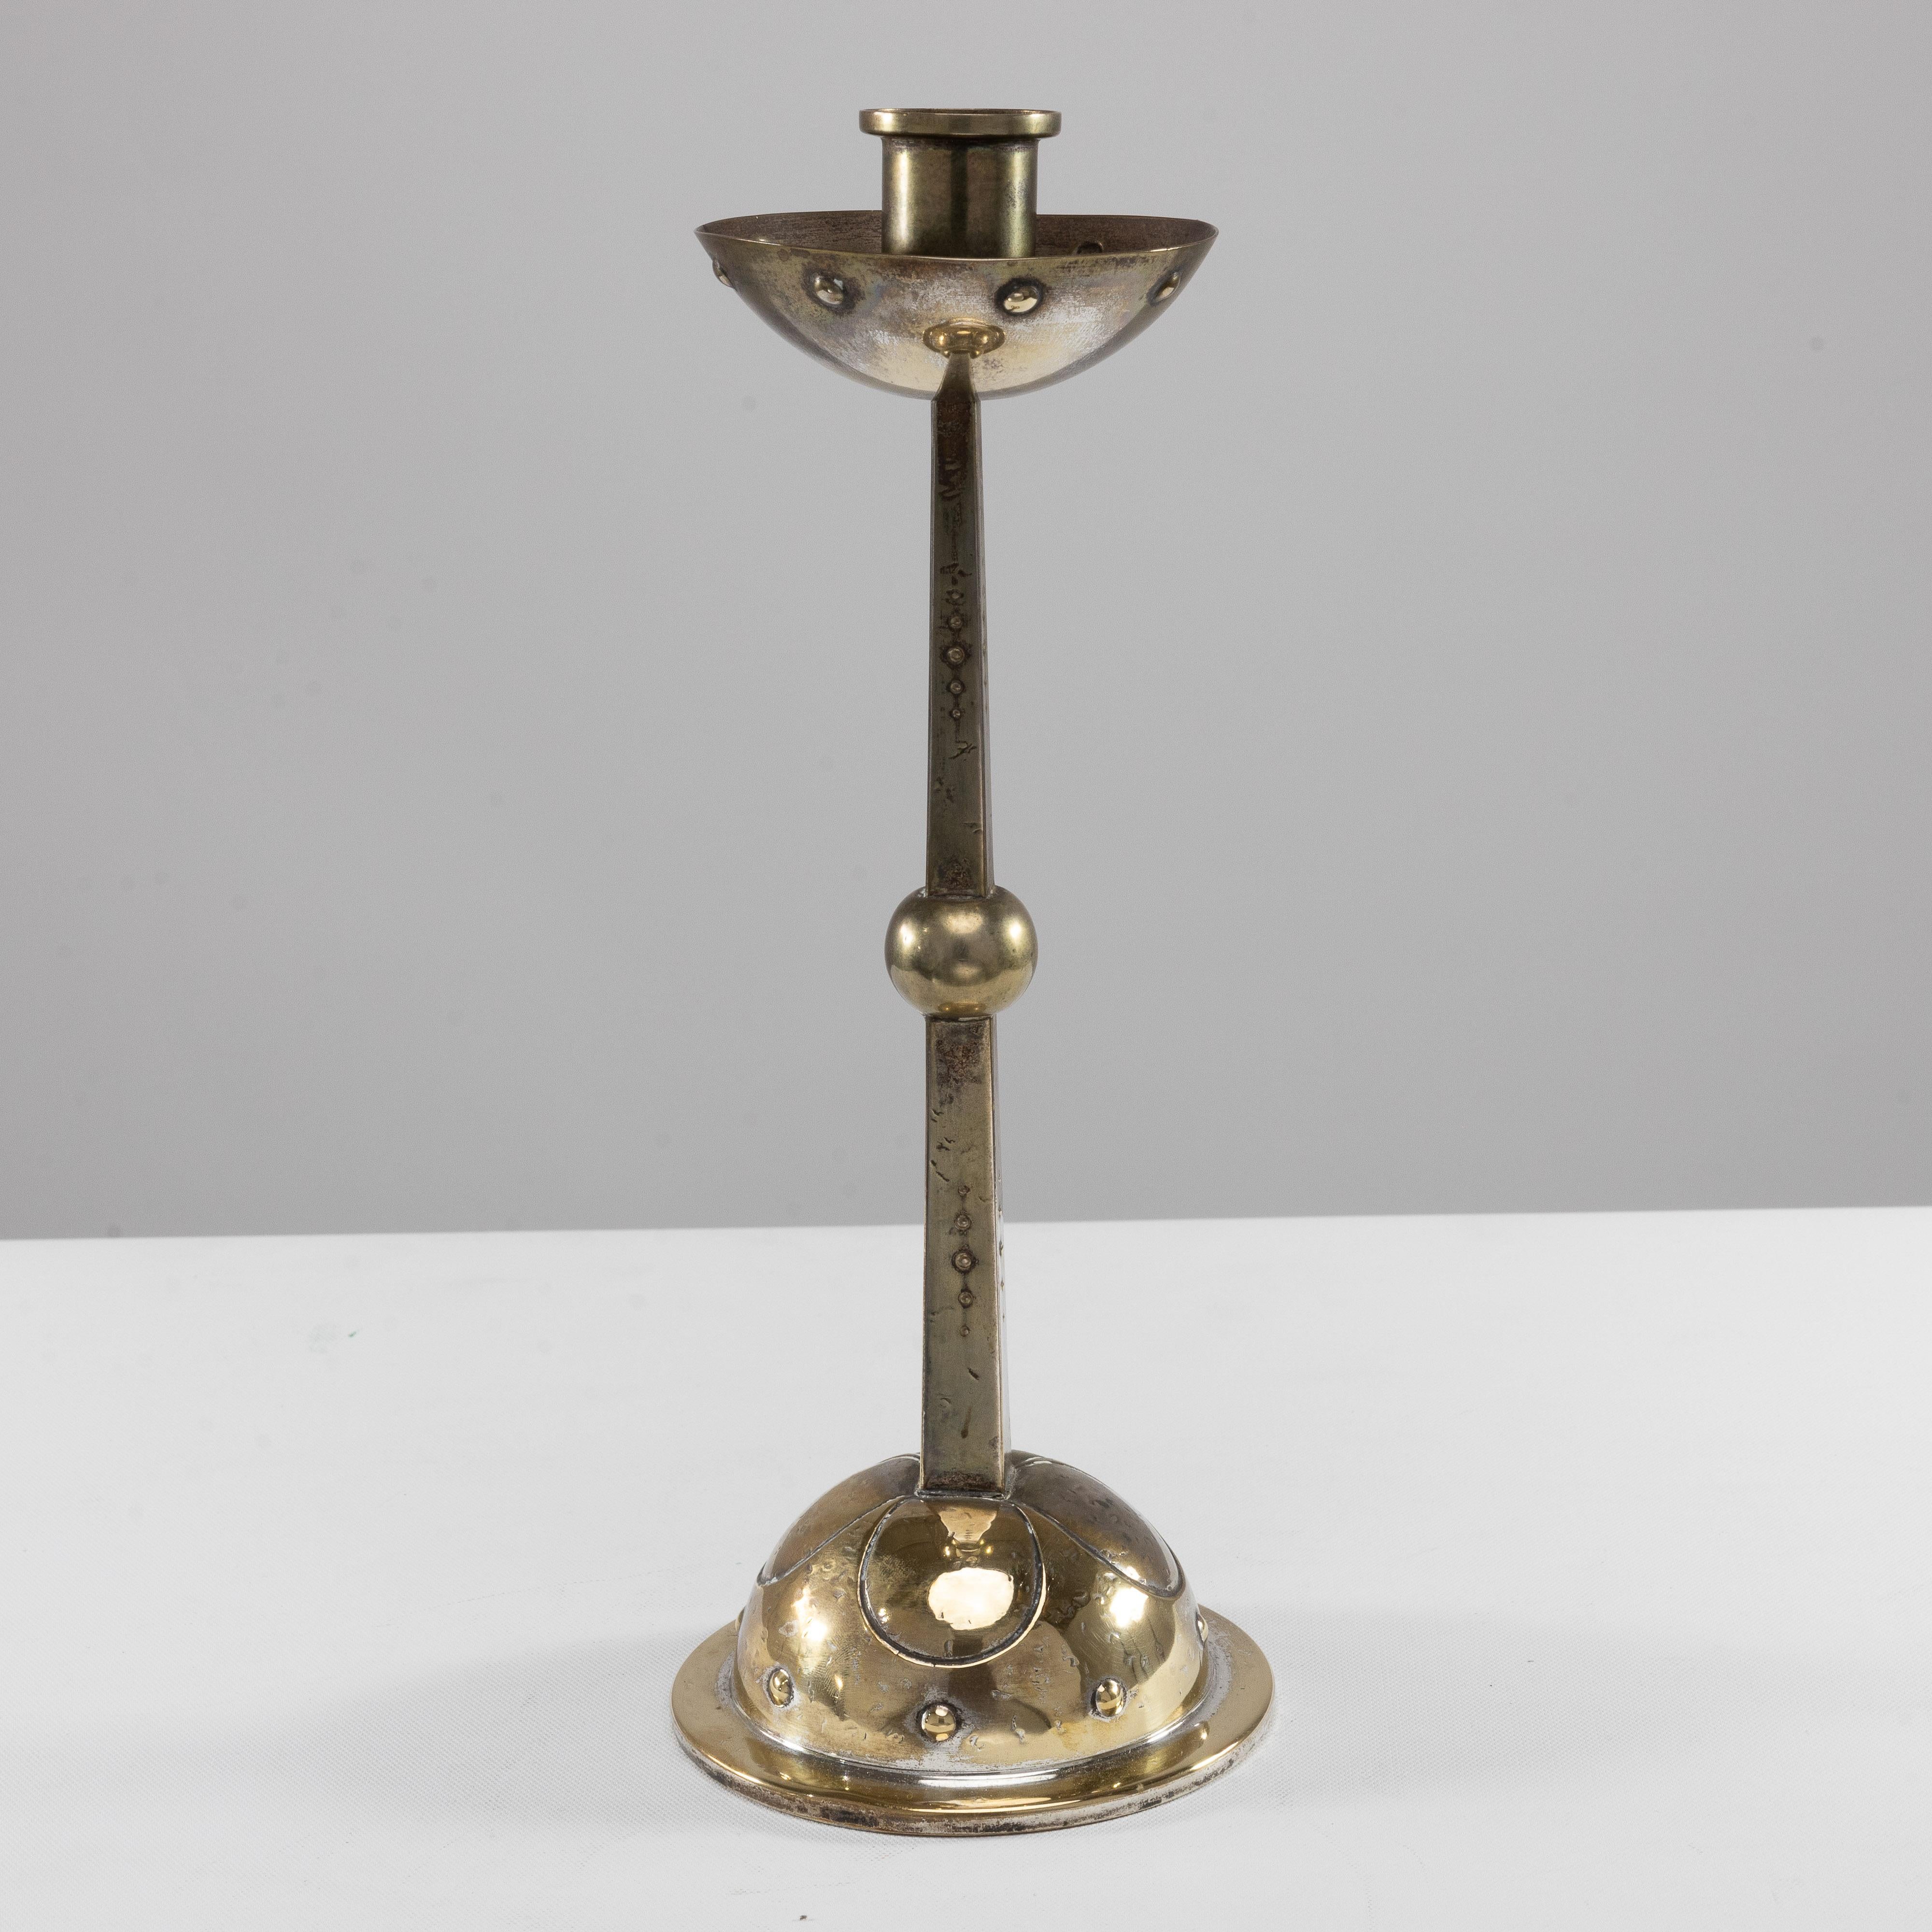 WMF. 
An Arts and Crafts Silver plated candlestick with a bowl-shaped drip tray to the top with dot details, the main stem a central knop also decorated with diminishing dot details uniting to the dome-shaped base.
Stamped to the base WMF and a